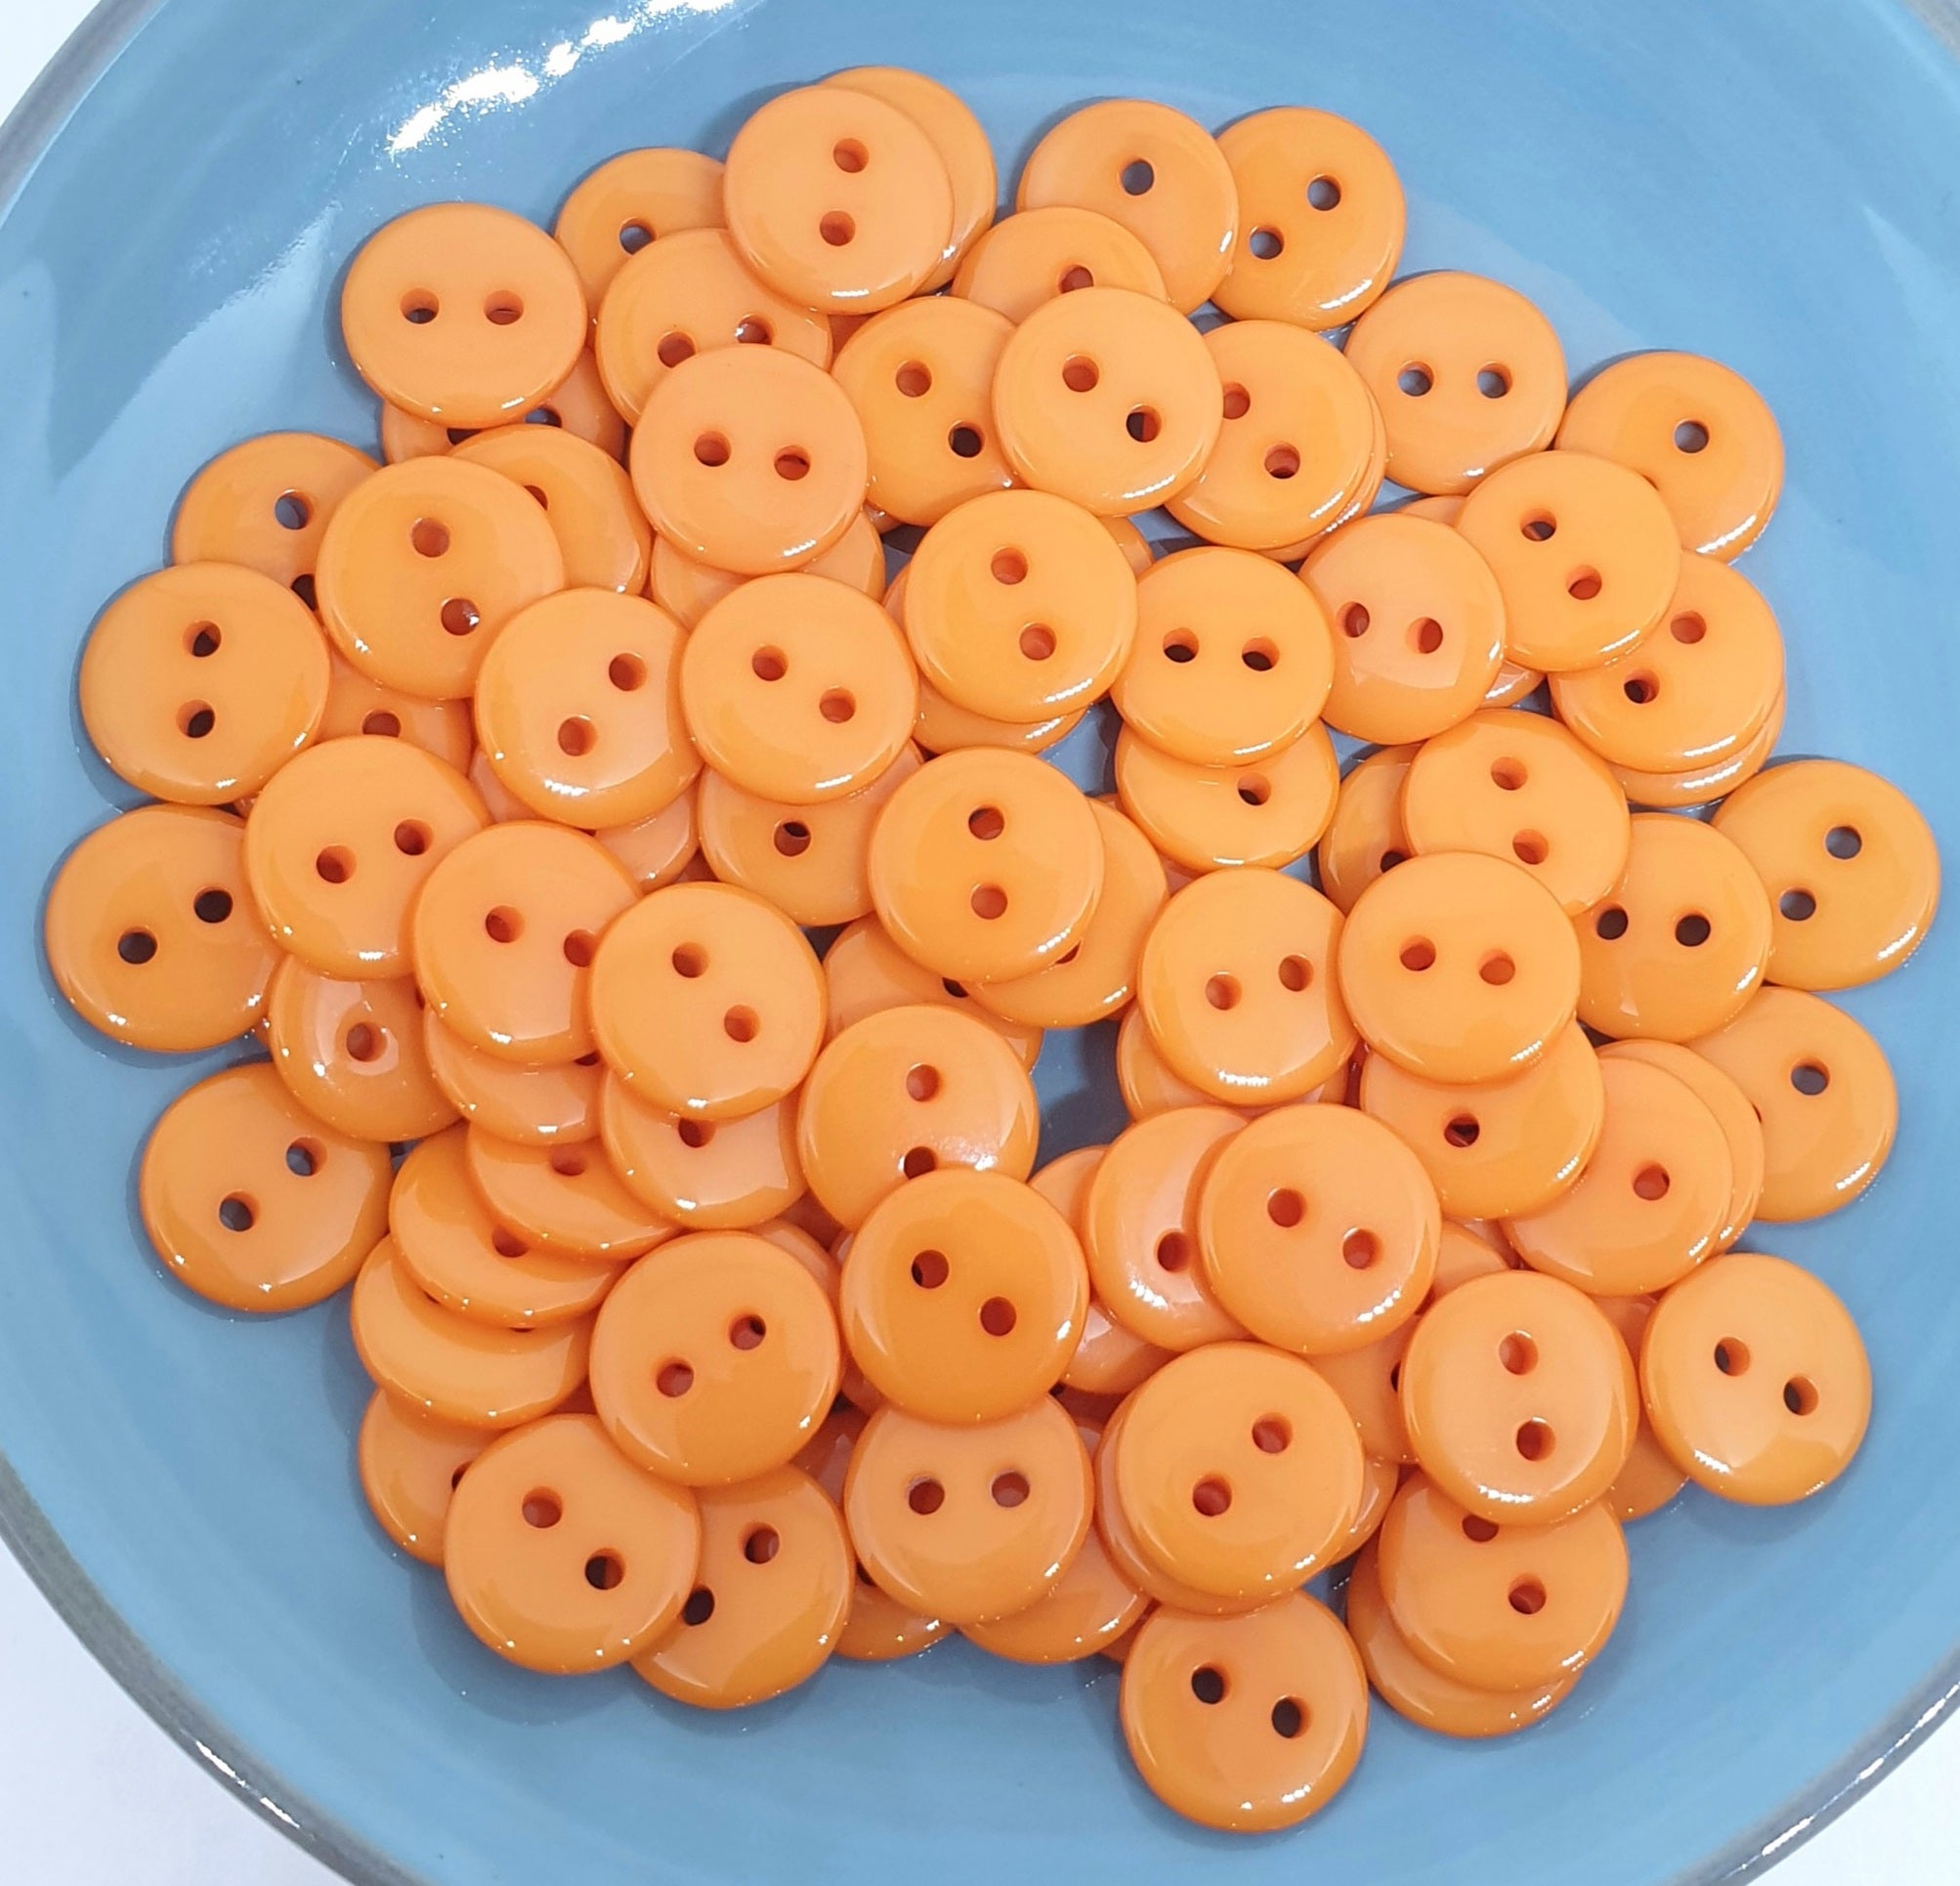 MajorCrafts 120pcs 10mm Orange 2 Holes Small Round Resin Sewing Buttons B11